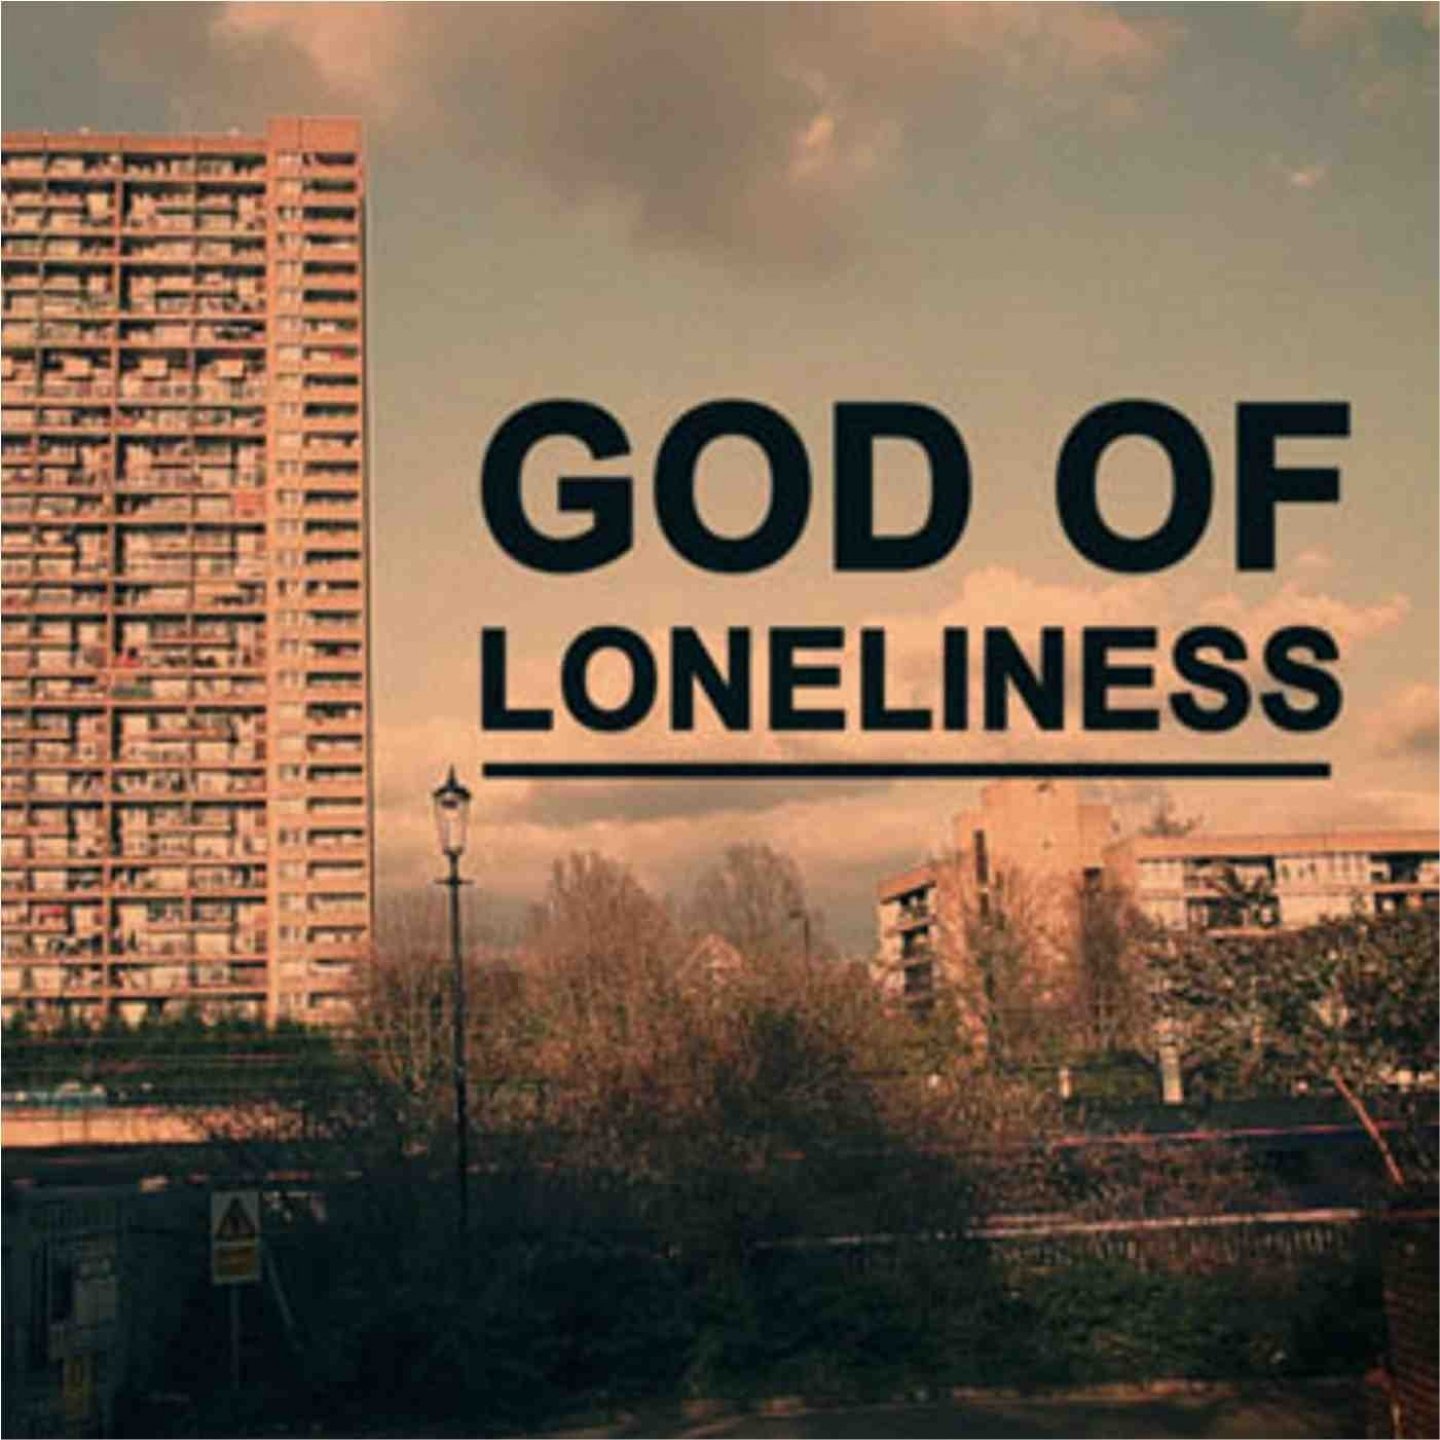 The God of Loneliness. Lonely Goddess.